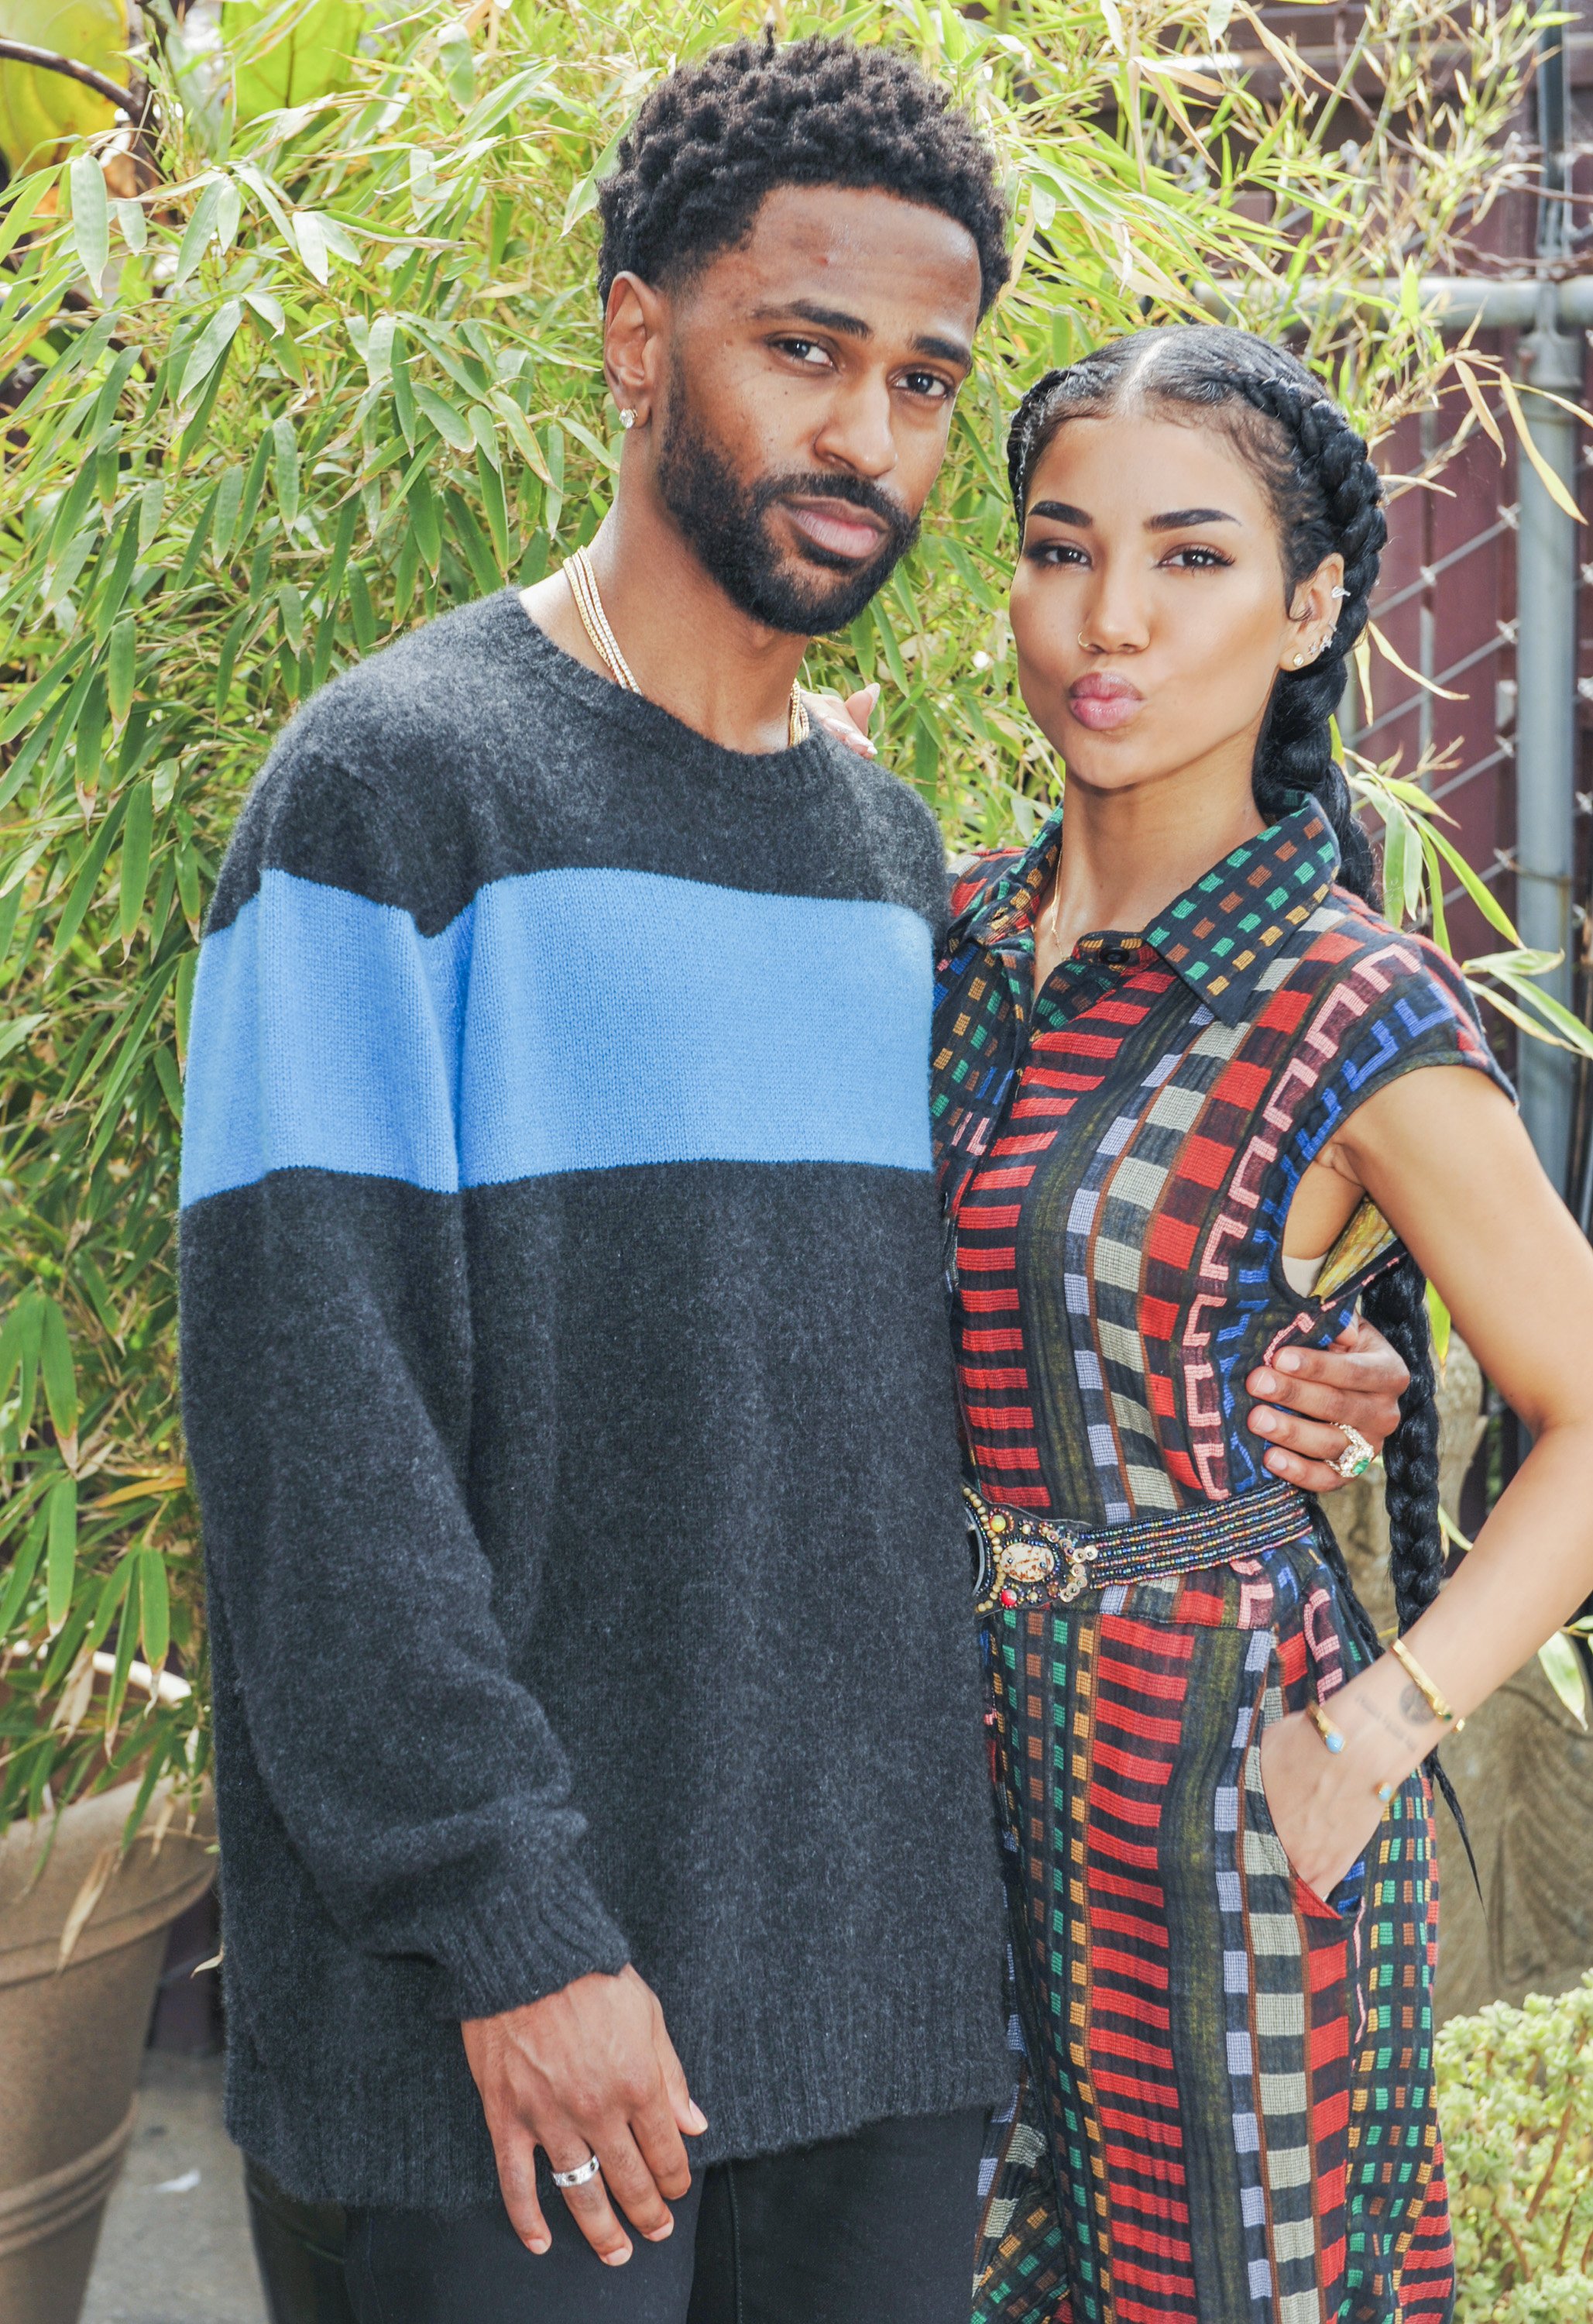 Big Sean and his girlfriend Jhene Aiko at the NAMI West LA Moroccan Gala Honoring Jhene Aiko on May 20, 2018 | Source: Getty Images